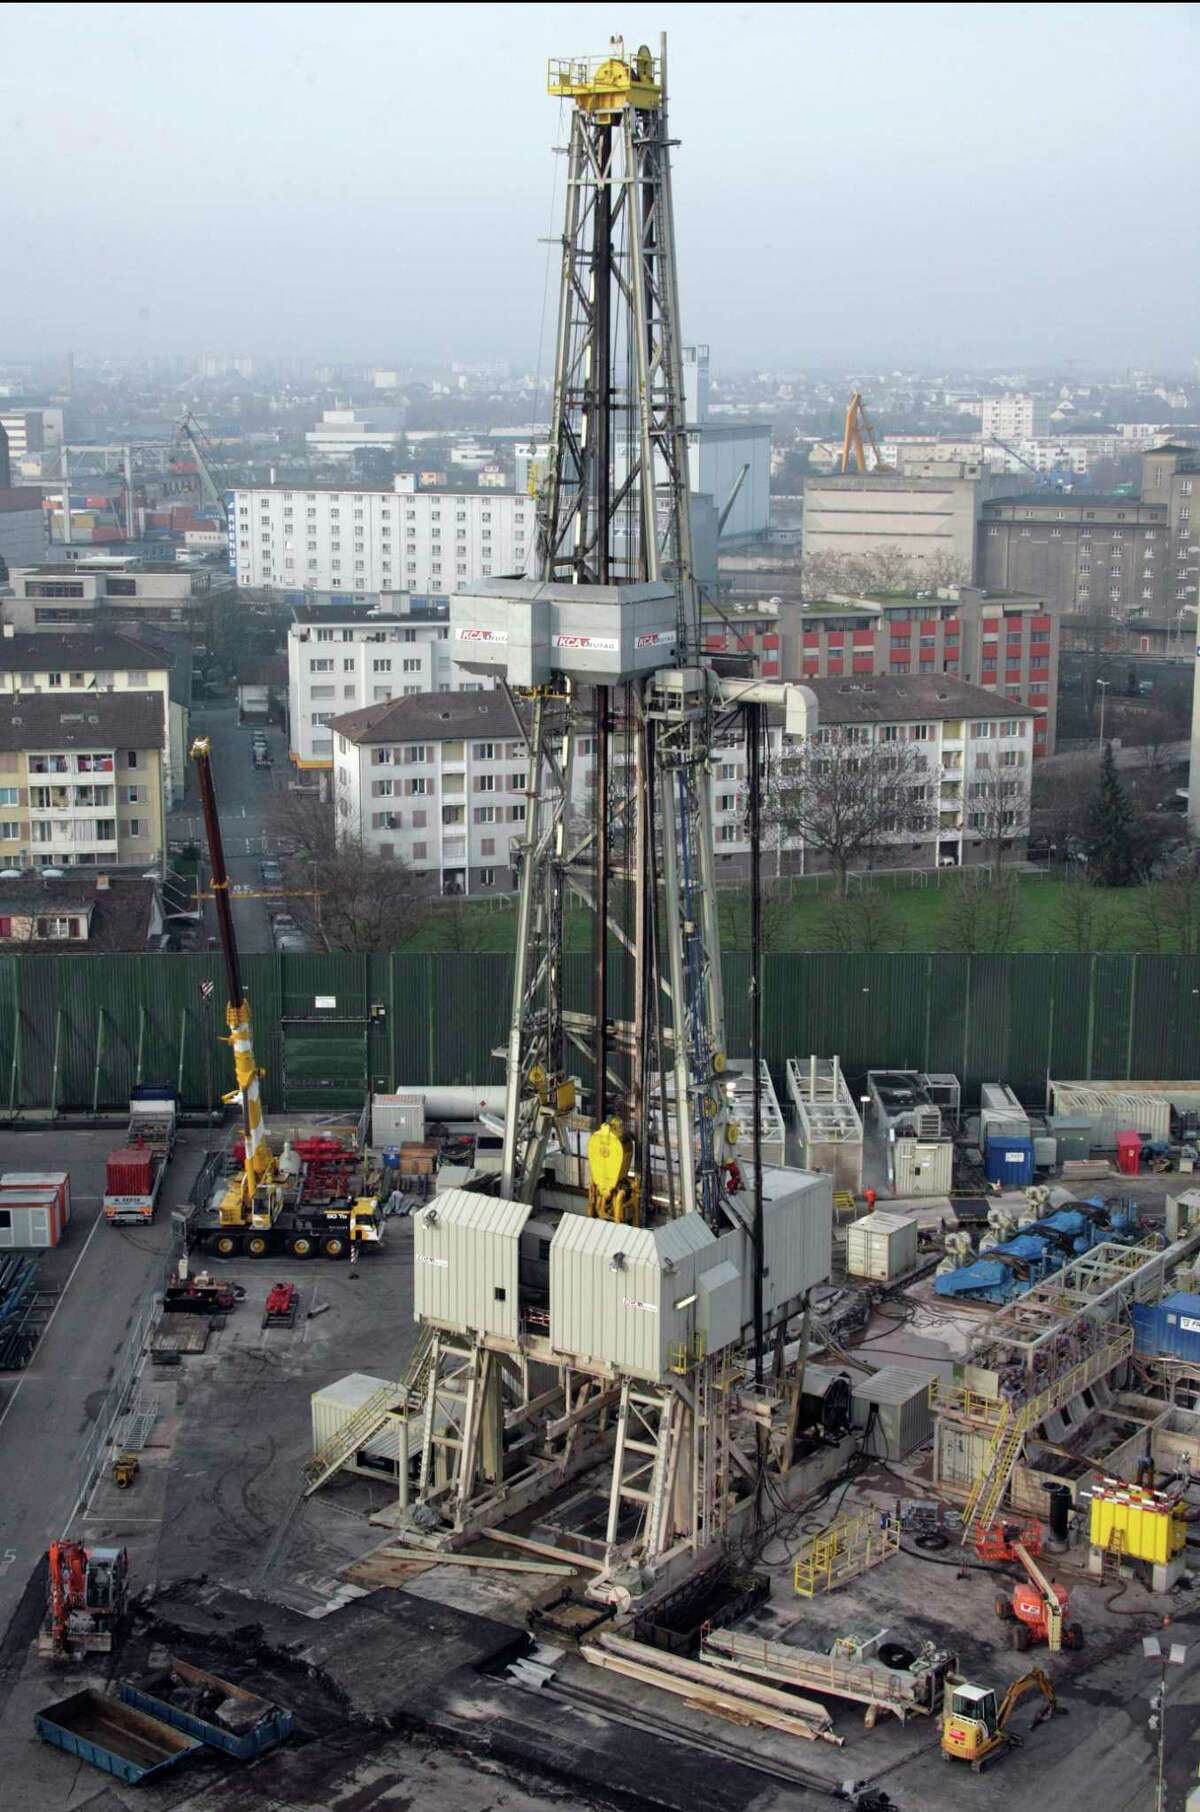 ** ADVANCE FOR SUNDAY, AUG. 5 ** A drilling derrick as part of the energy research project Deep Heat Mining is seen at the Industriellen Werke Basel in Basel, Switzerland, Jan. 16, 2007. Scientists say geothermal energy is clean, quiet and virtually inexhaustible, and estimate it could provide 250,000 times more energy than the world currently consumes each year, with nearly zero impact on the climate or the environment.